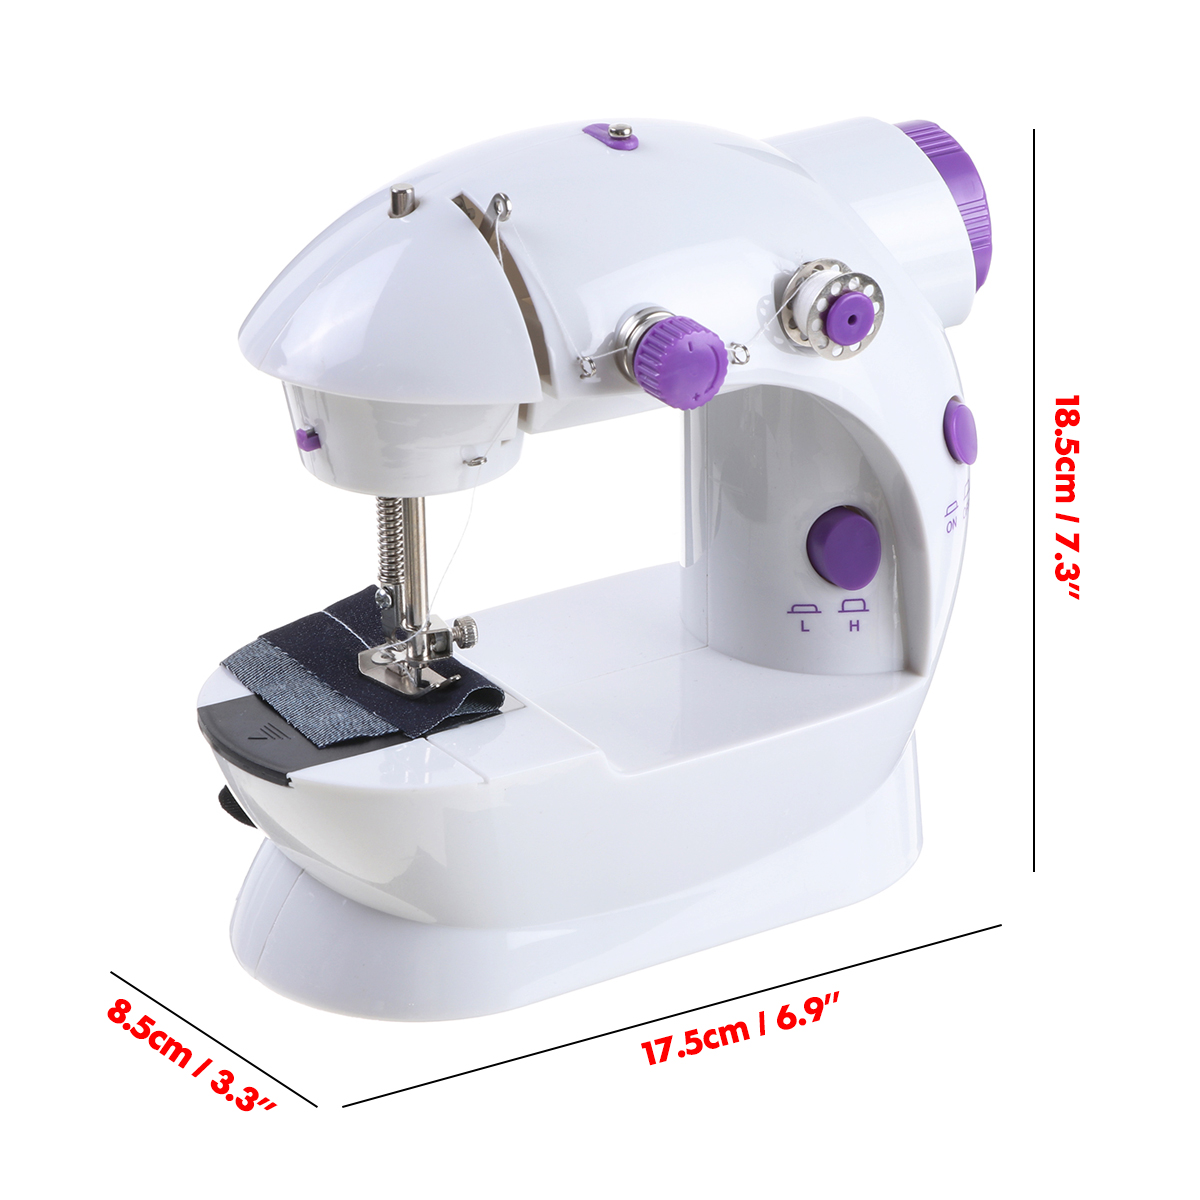 Rechargeable-Portable-Electric-Sewing-Machine-Multi-function-Household-Sewing-Machine-1753879-4